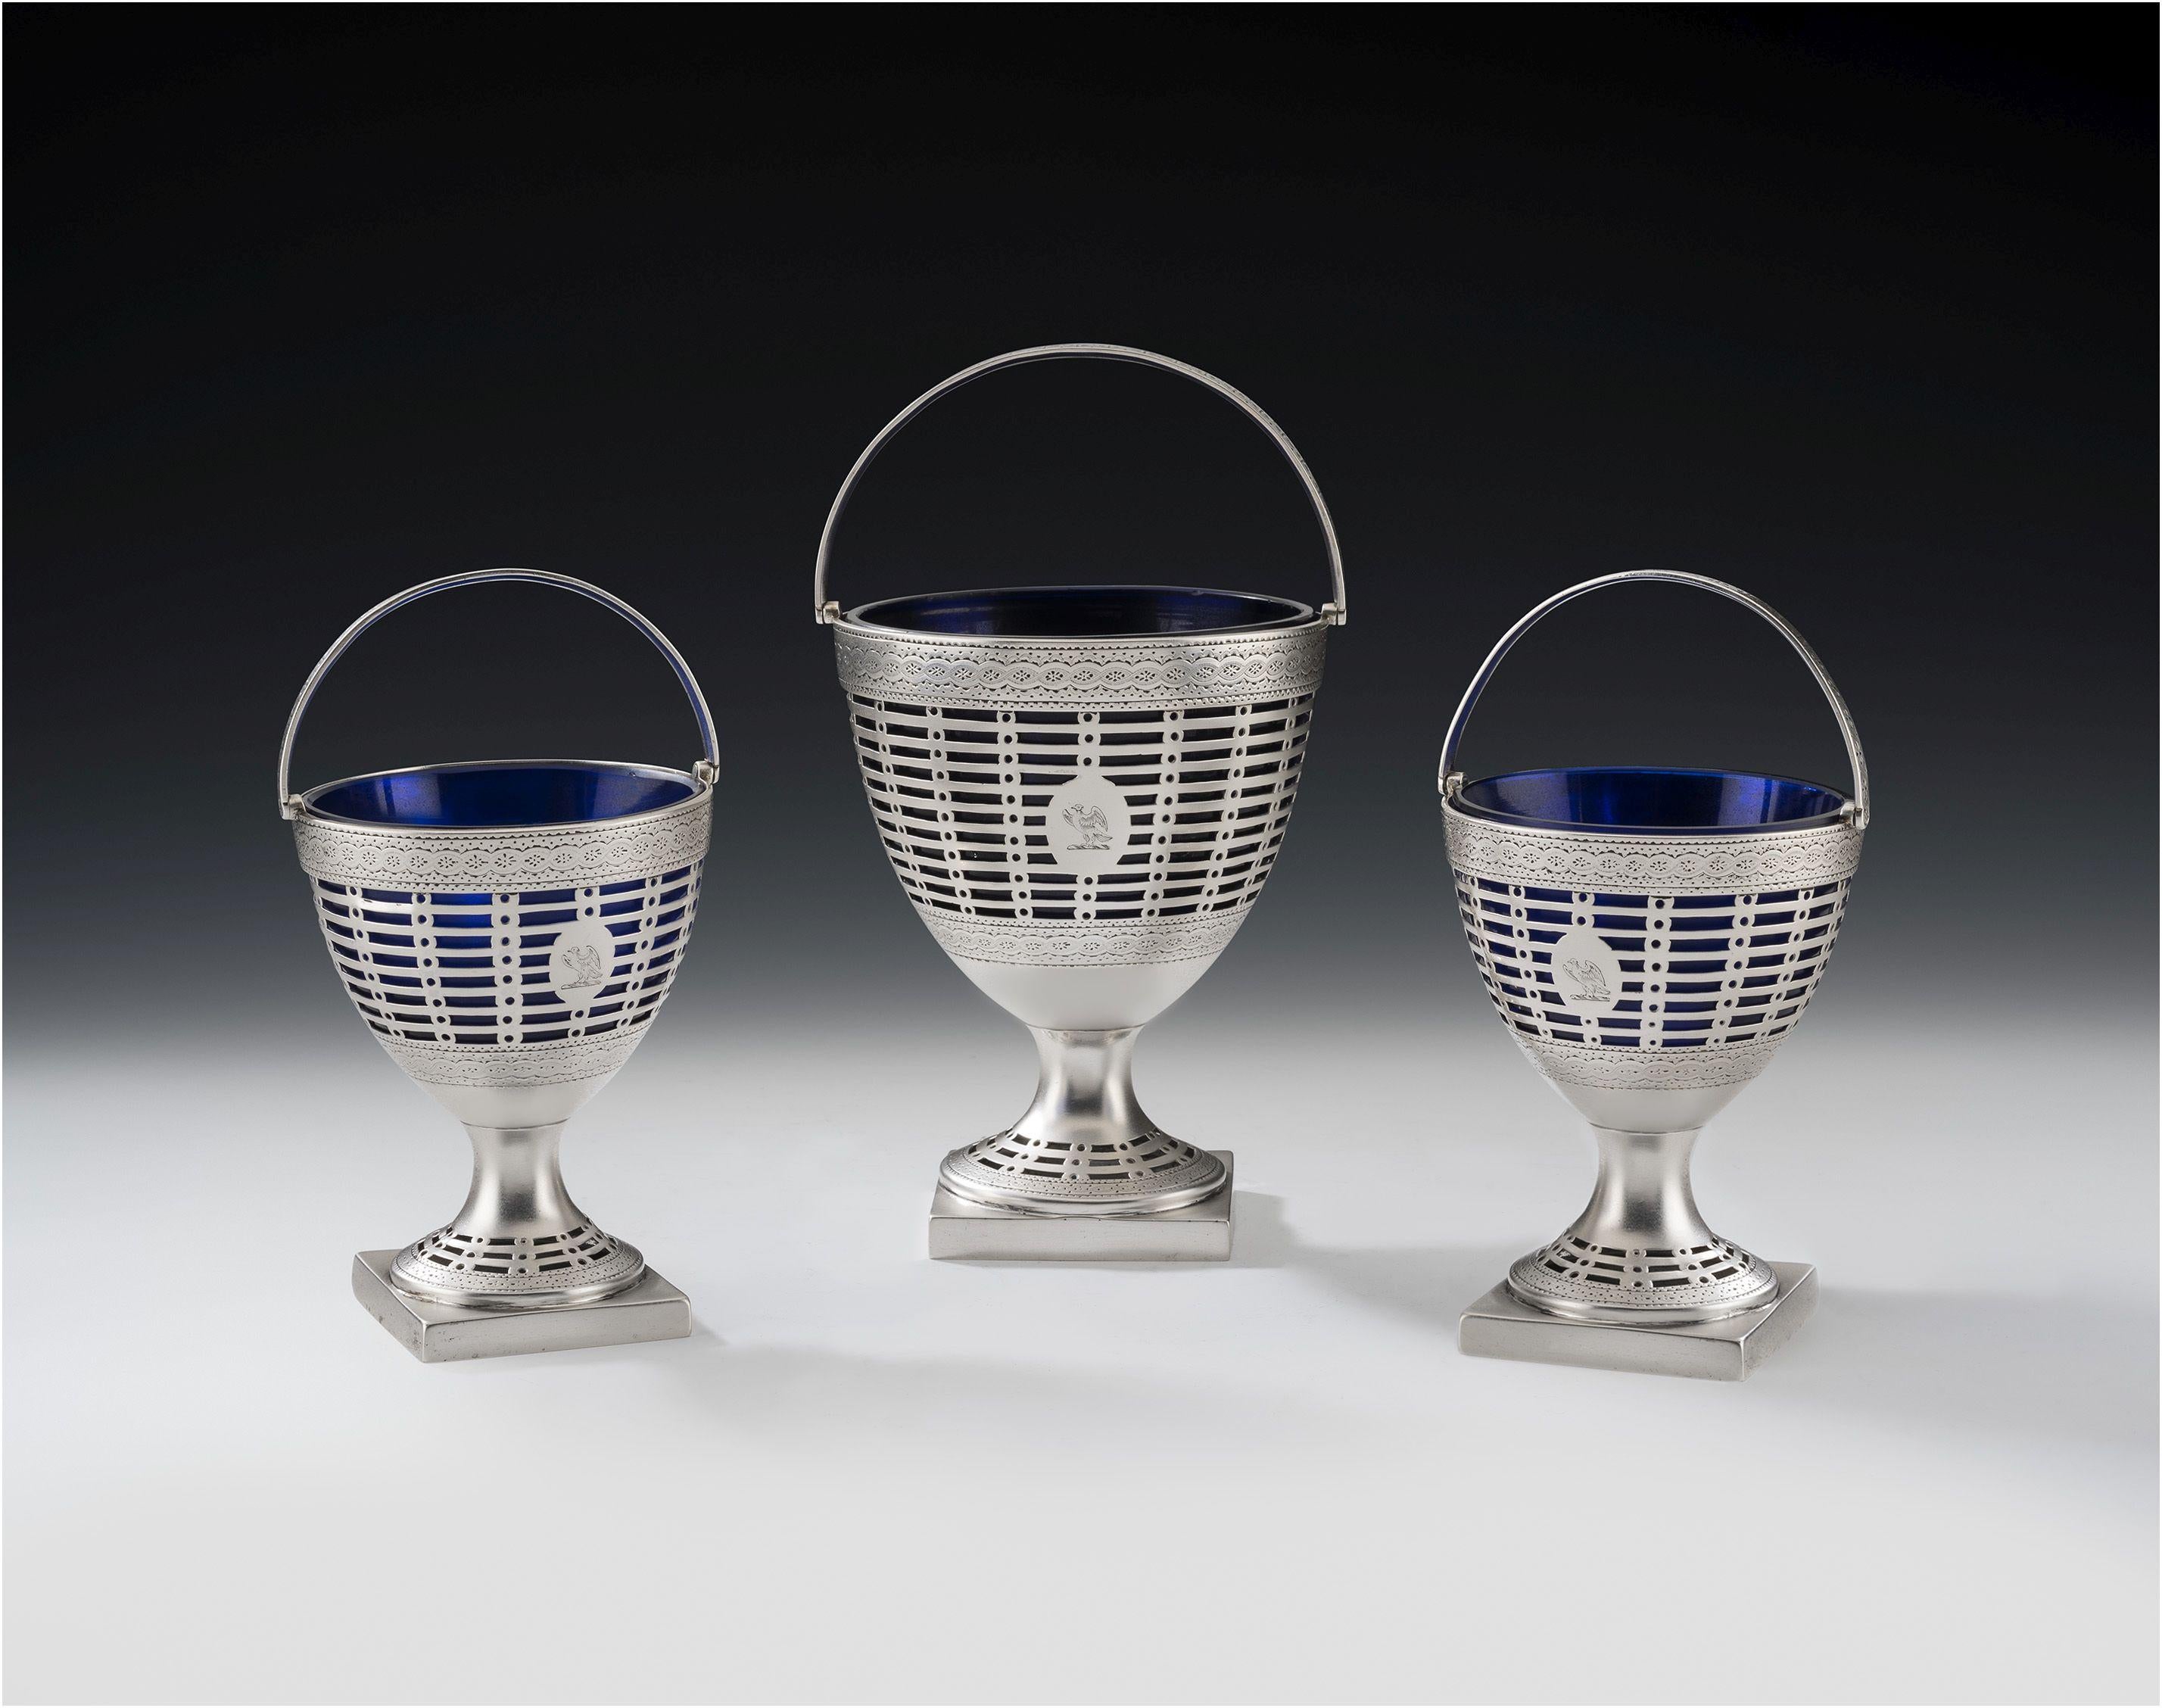 This extremely rare and fine garniture of George III neo classical baskets were made in London in 1778 by Philip Freeman. The Baskets all stand on a square pedestal foot which is pierced with horizontal pails and roundels, as well as being engraved